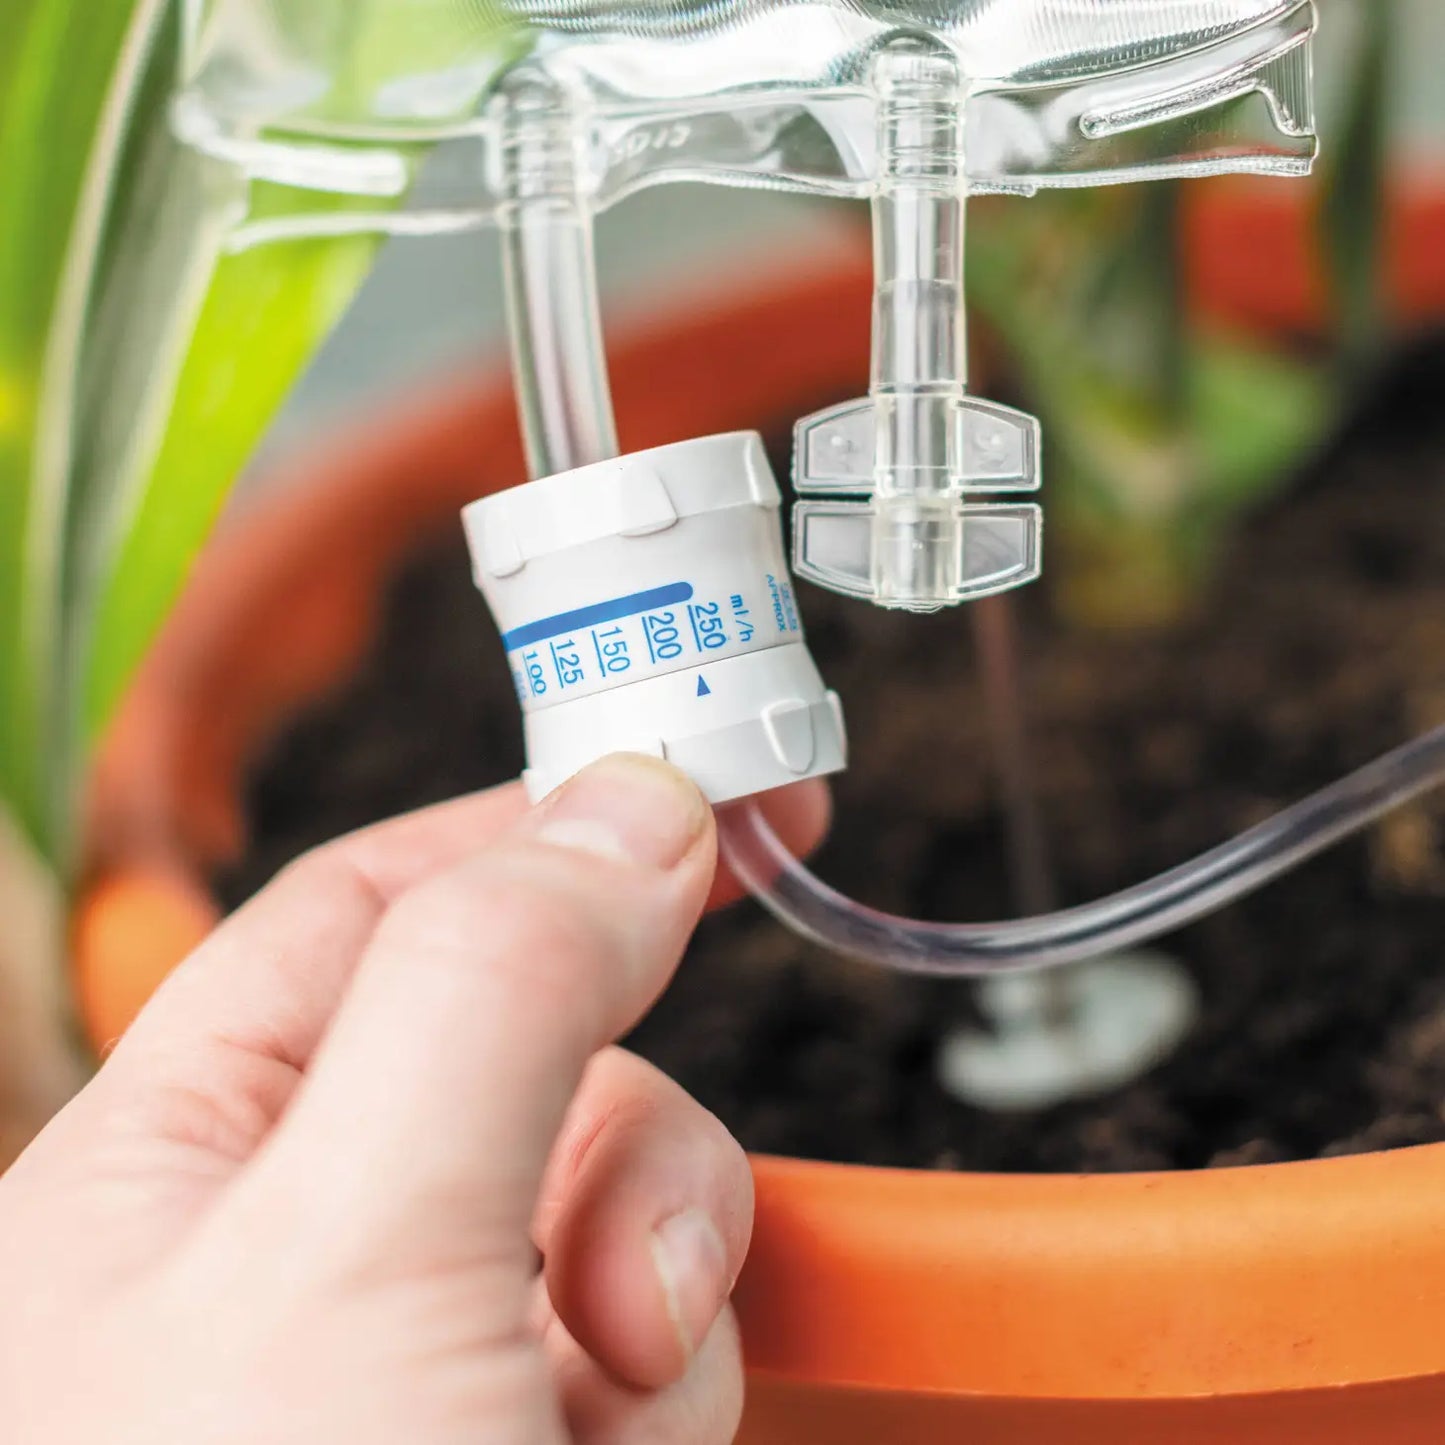 Plant Life Support - IV Drip for your Houseplant!